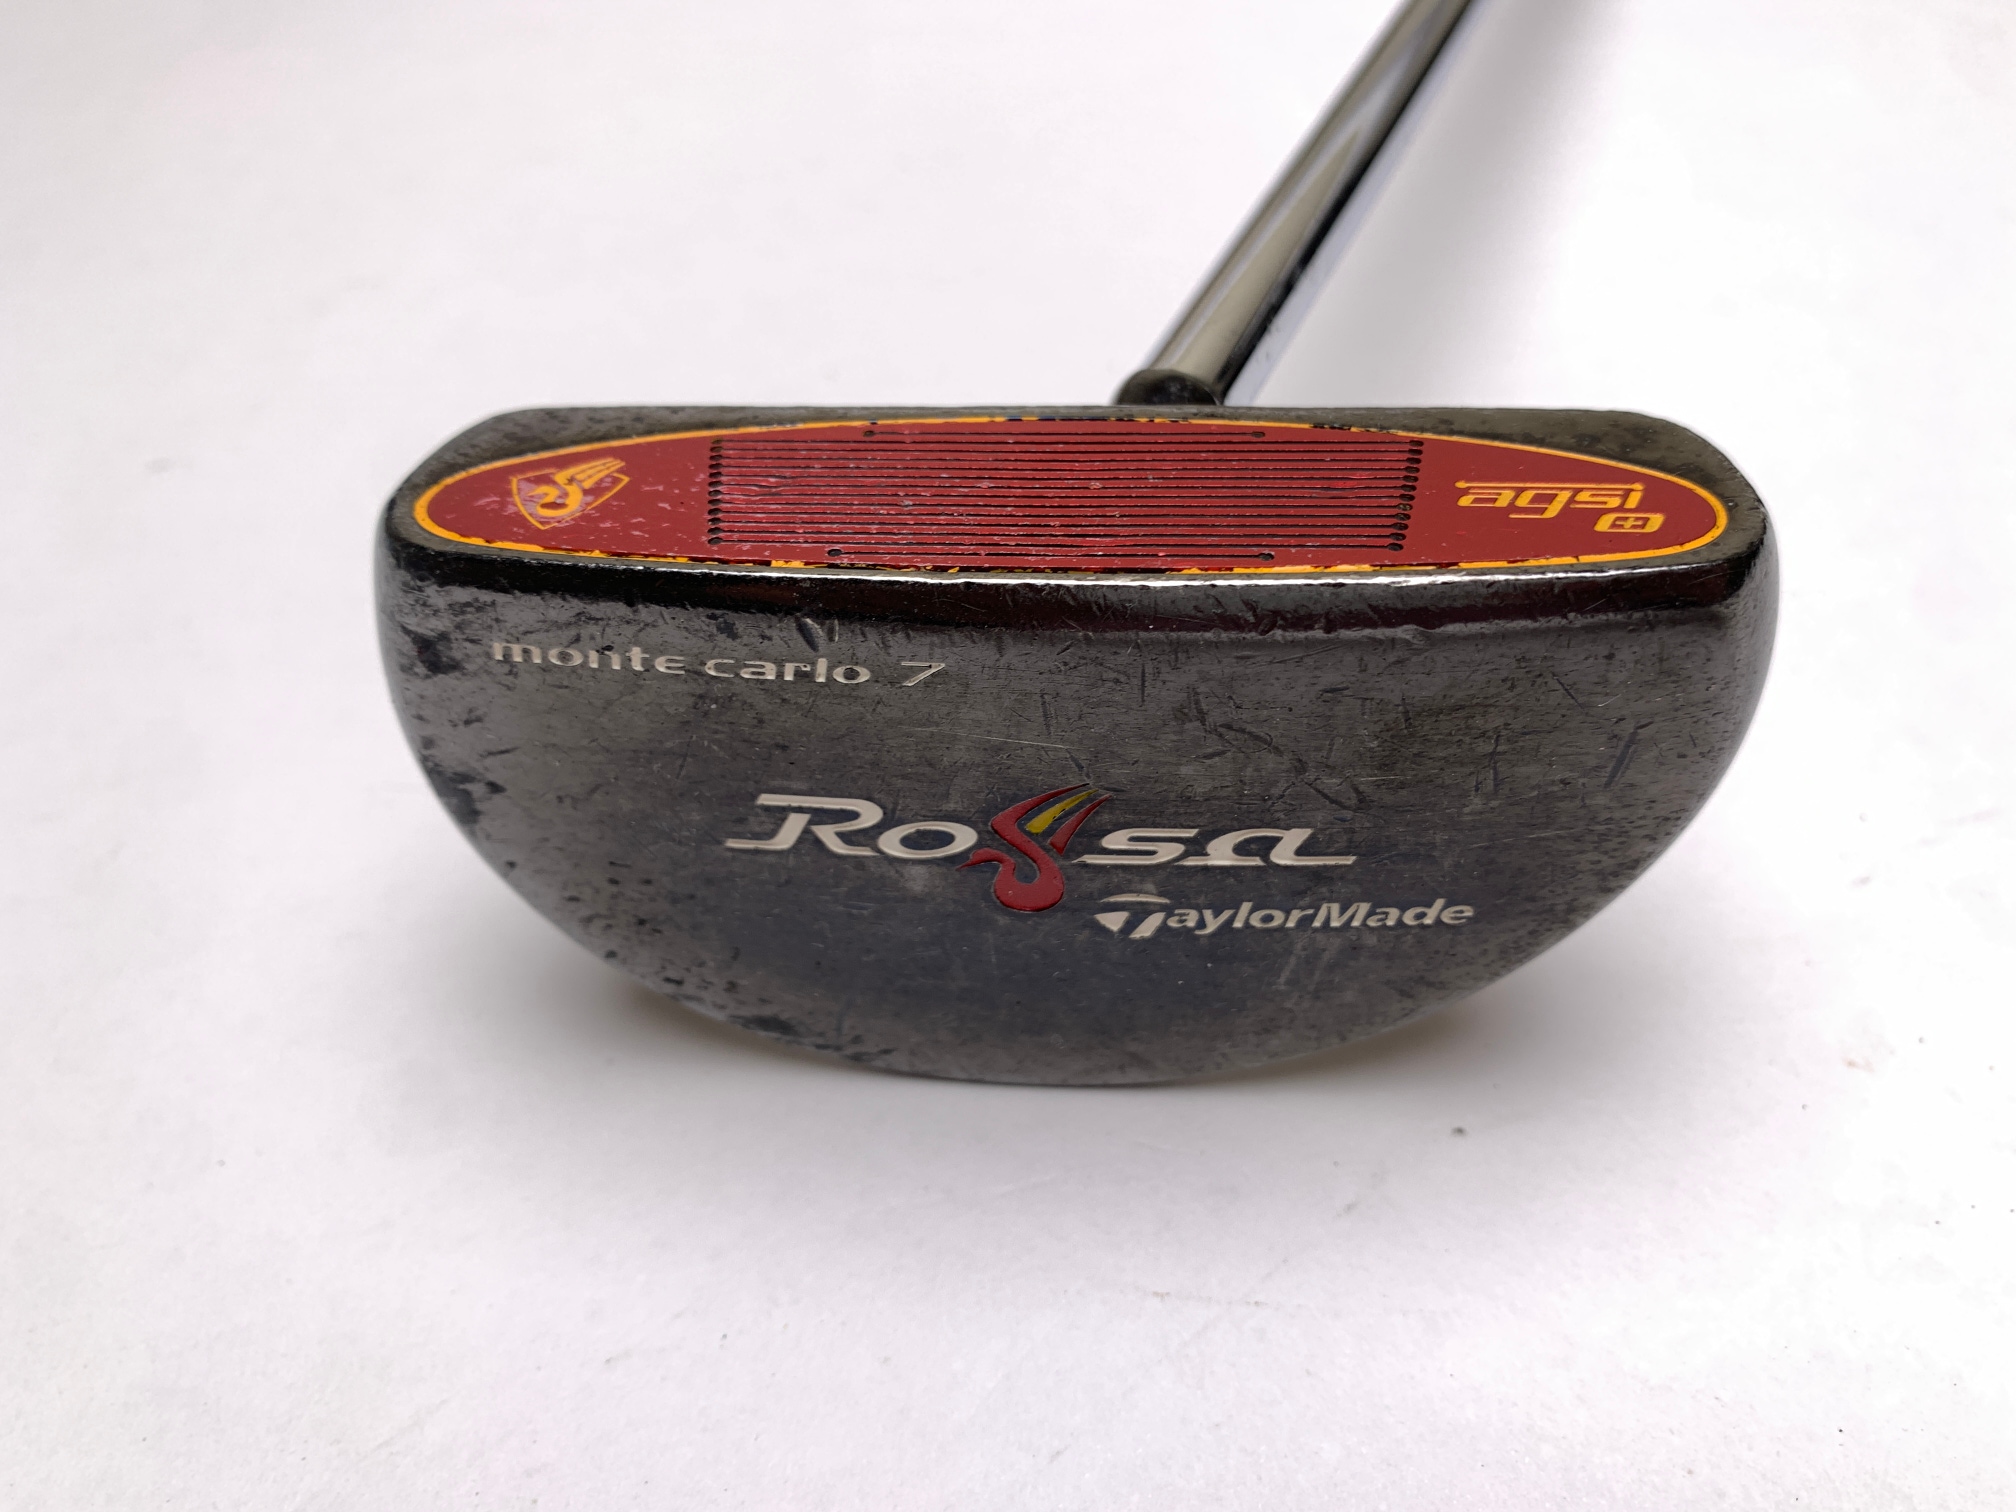 Taylormade Rossa Monte Carlo 7 AGSI+ Putter 35" Mens RH